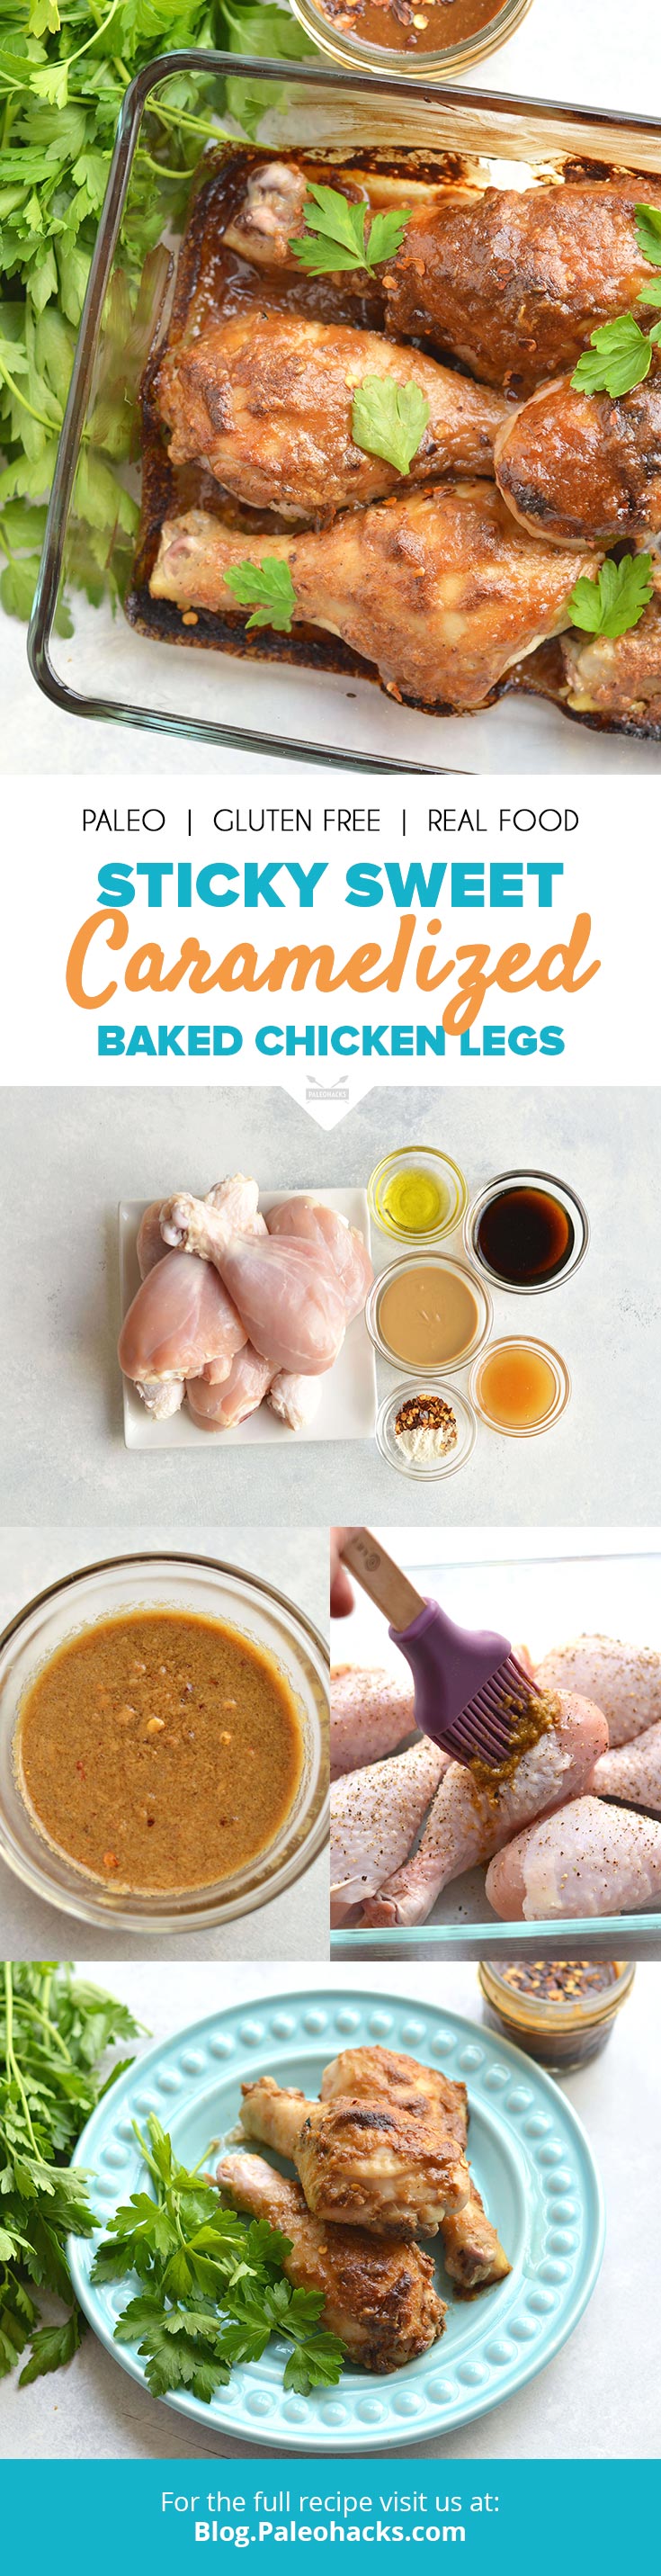 How to Make Amazing Caramelized Chicken Legs 